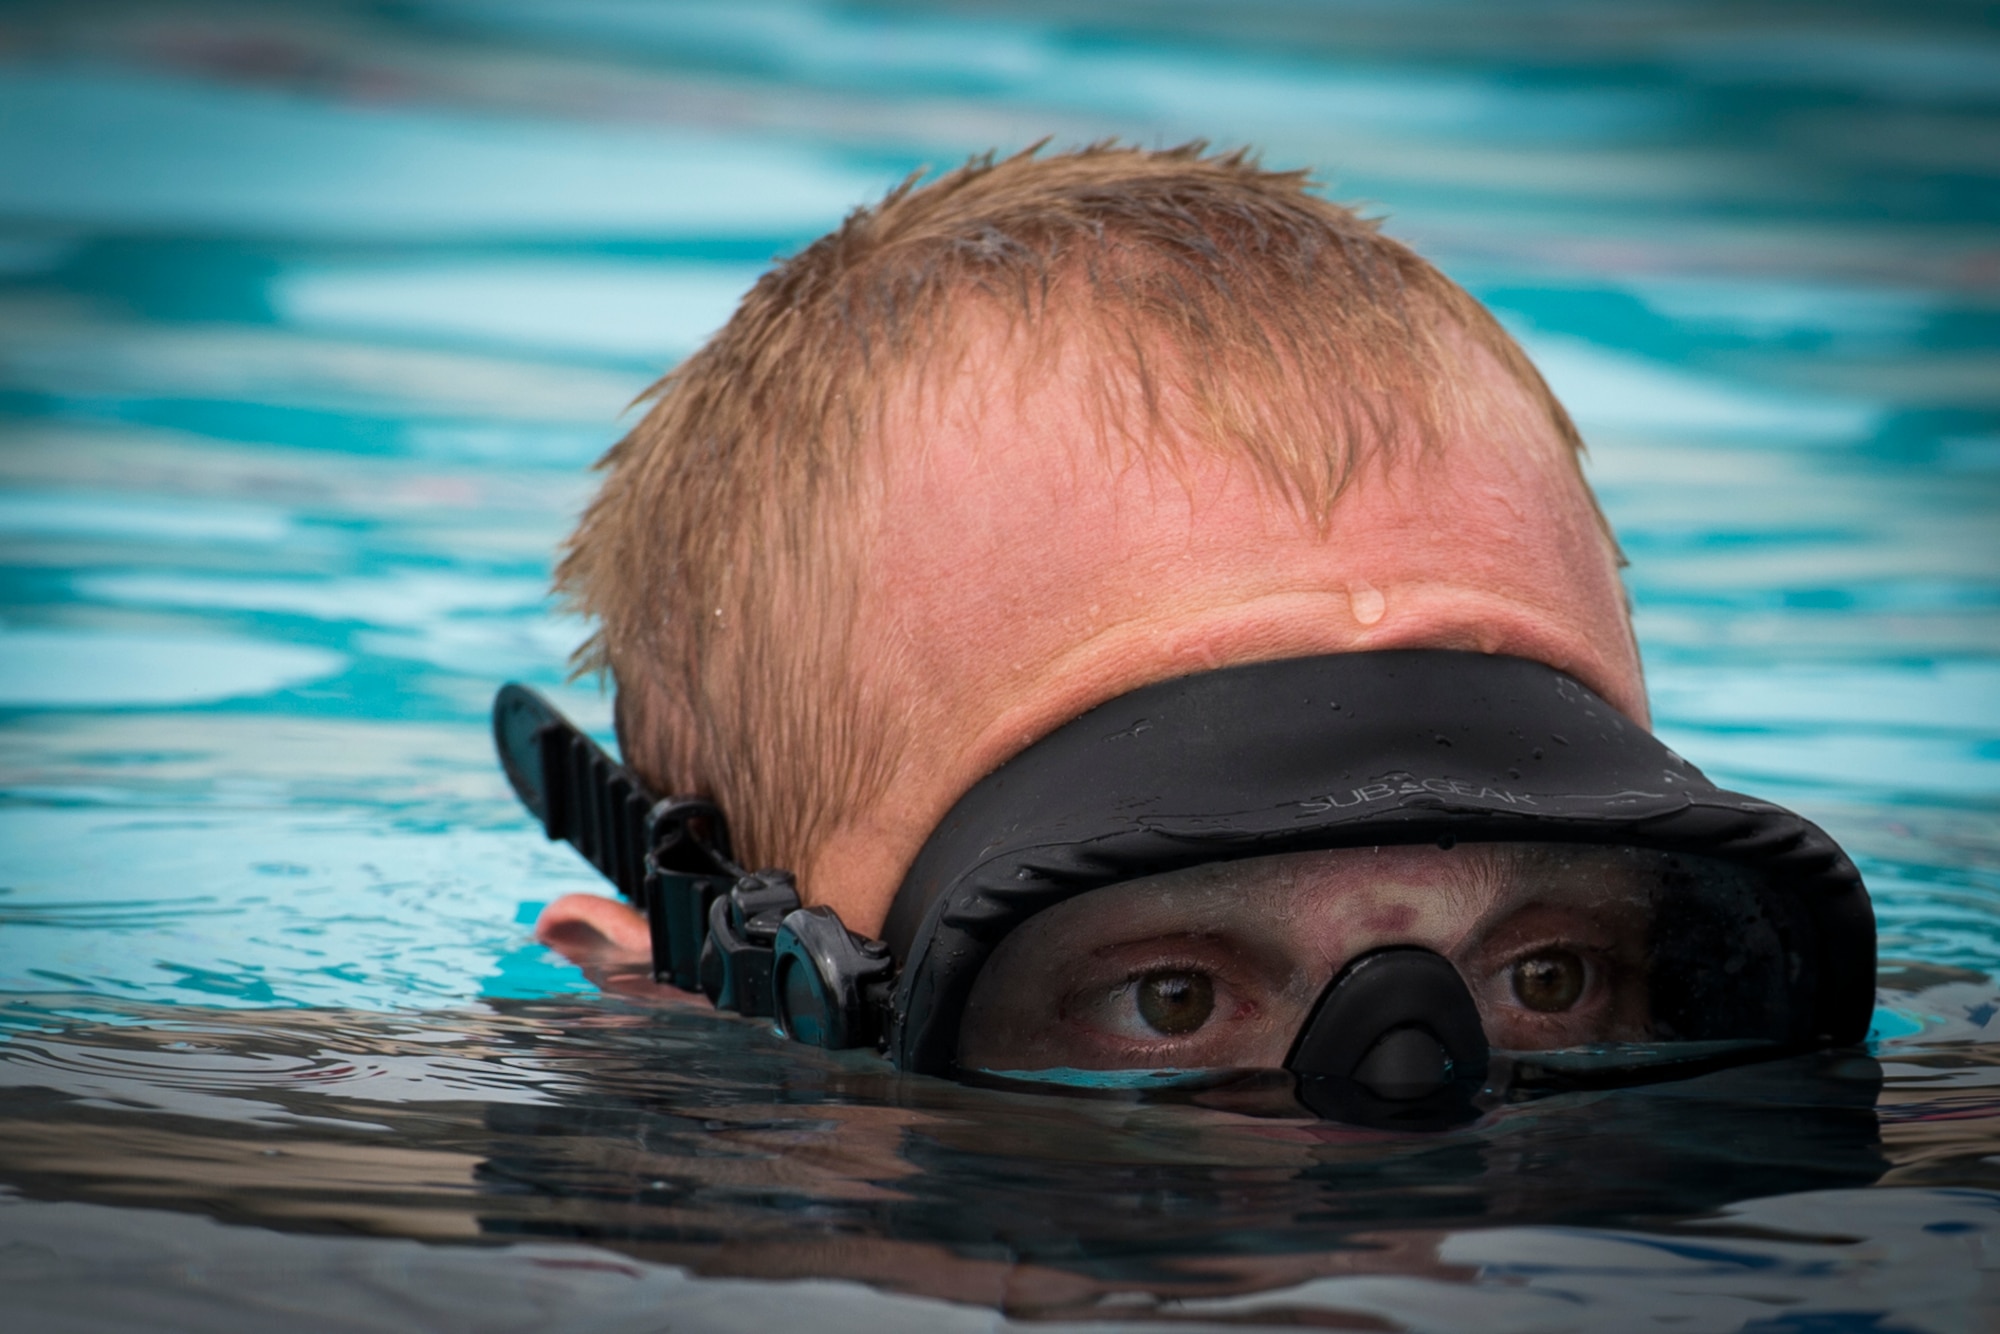 Senior Airman Heath Jolley, a survival, evasion, resistance and escape specialist with the 1st Special Operations Support Squadron, supervises a rotary wing water survival training from underwater at Hurlburt Field, Fla., July 18, 2017. Three SERE specialists supervised more than 10 aircrew members performing emergency exit procedures while submerged to ensure the aircrew is proficient if ever faced with a real-world incident. (U.S. Air Force photo by Airman 1st Class Joseph Pick)